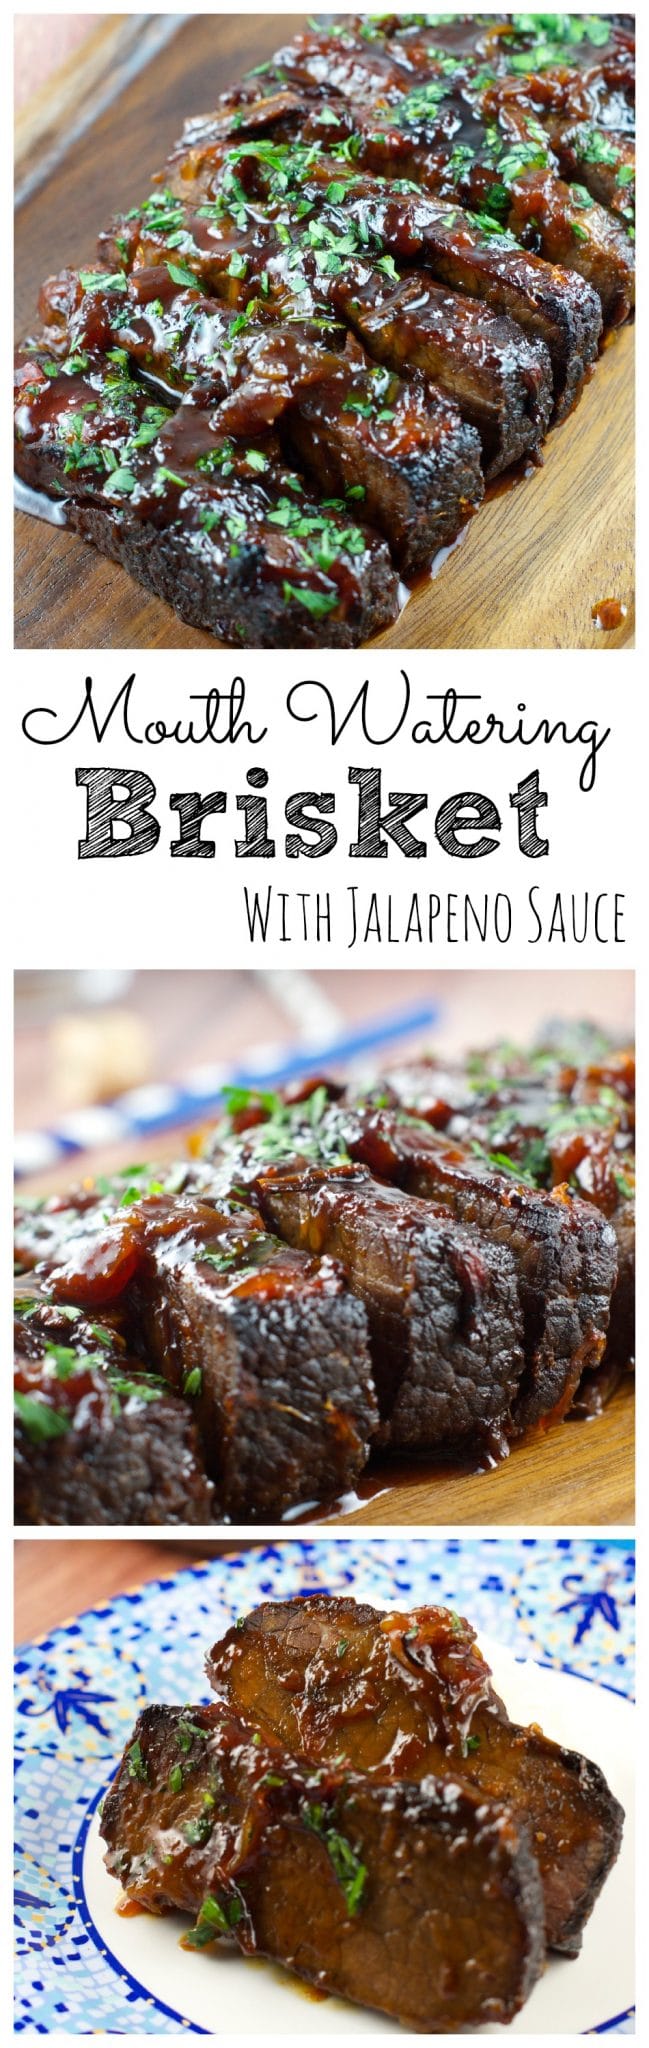 This melt in your mouth Jalapeño Brisket Recipe is a crowd pleaser! All the flavor without the heat. Serve it in your next gathering and it will be a hit.